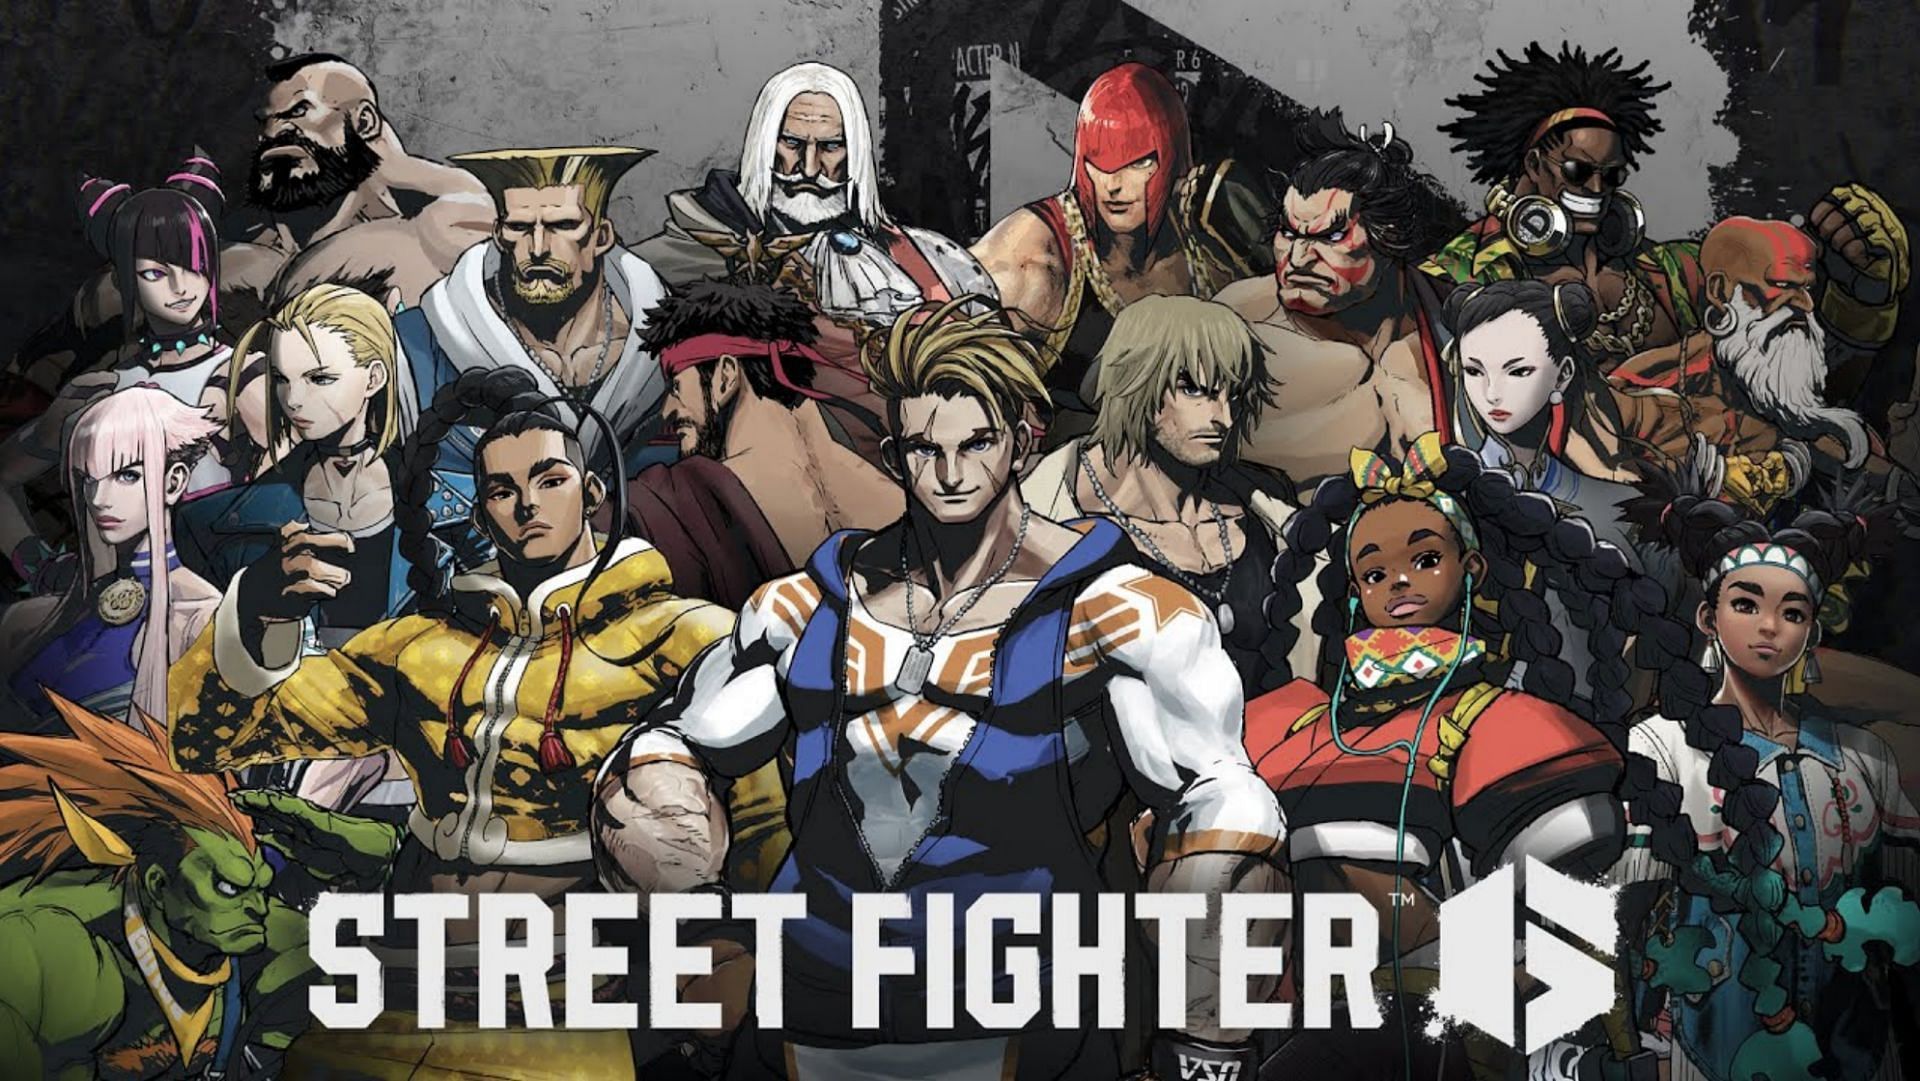 The Street Fighter 6 Closed Beta is almost here - what do fans need to know? (Image via Capcom)